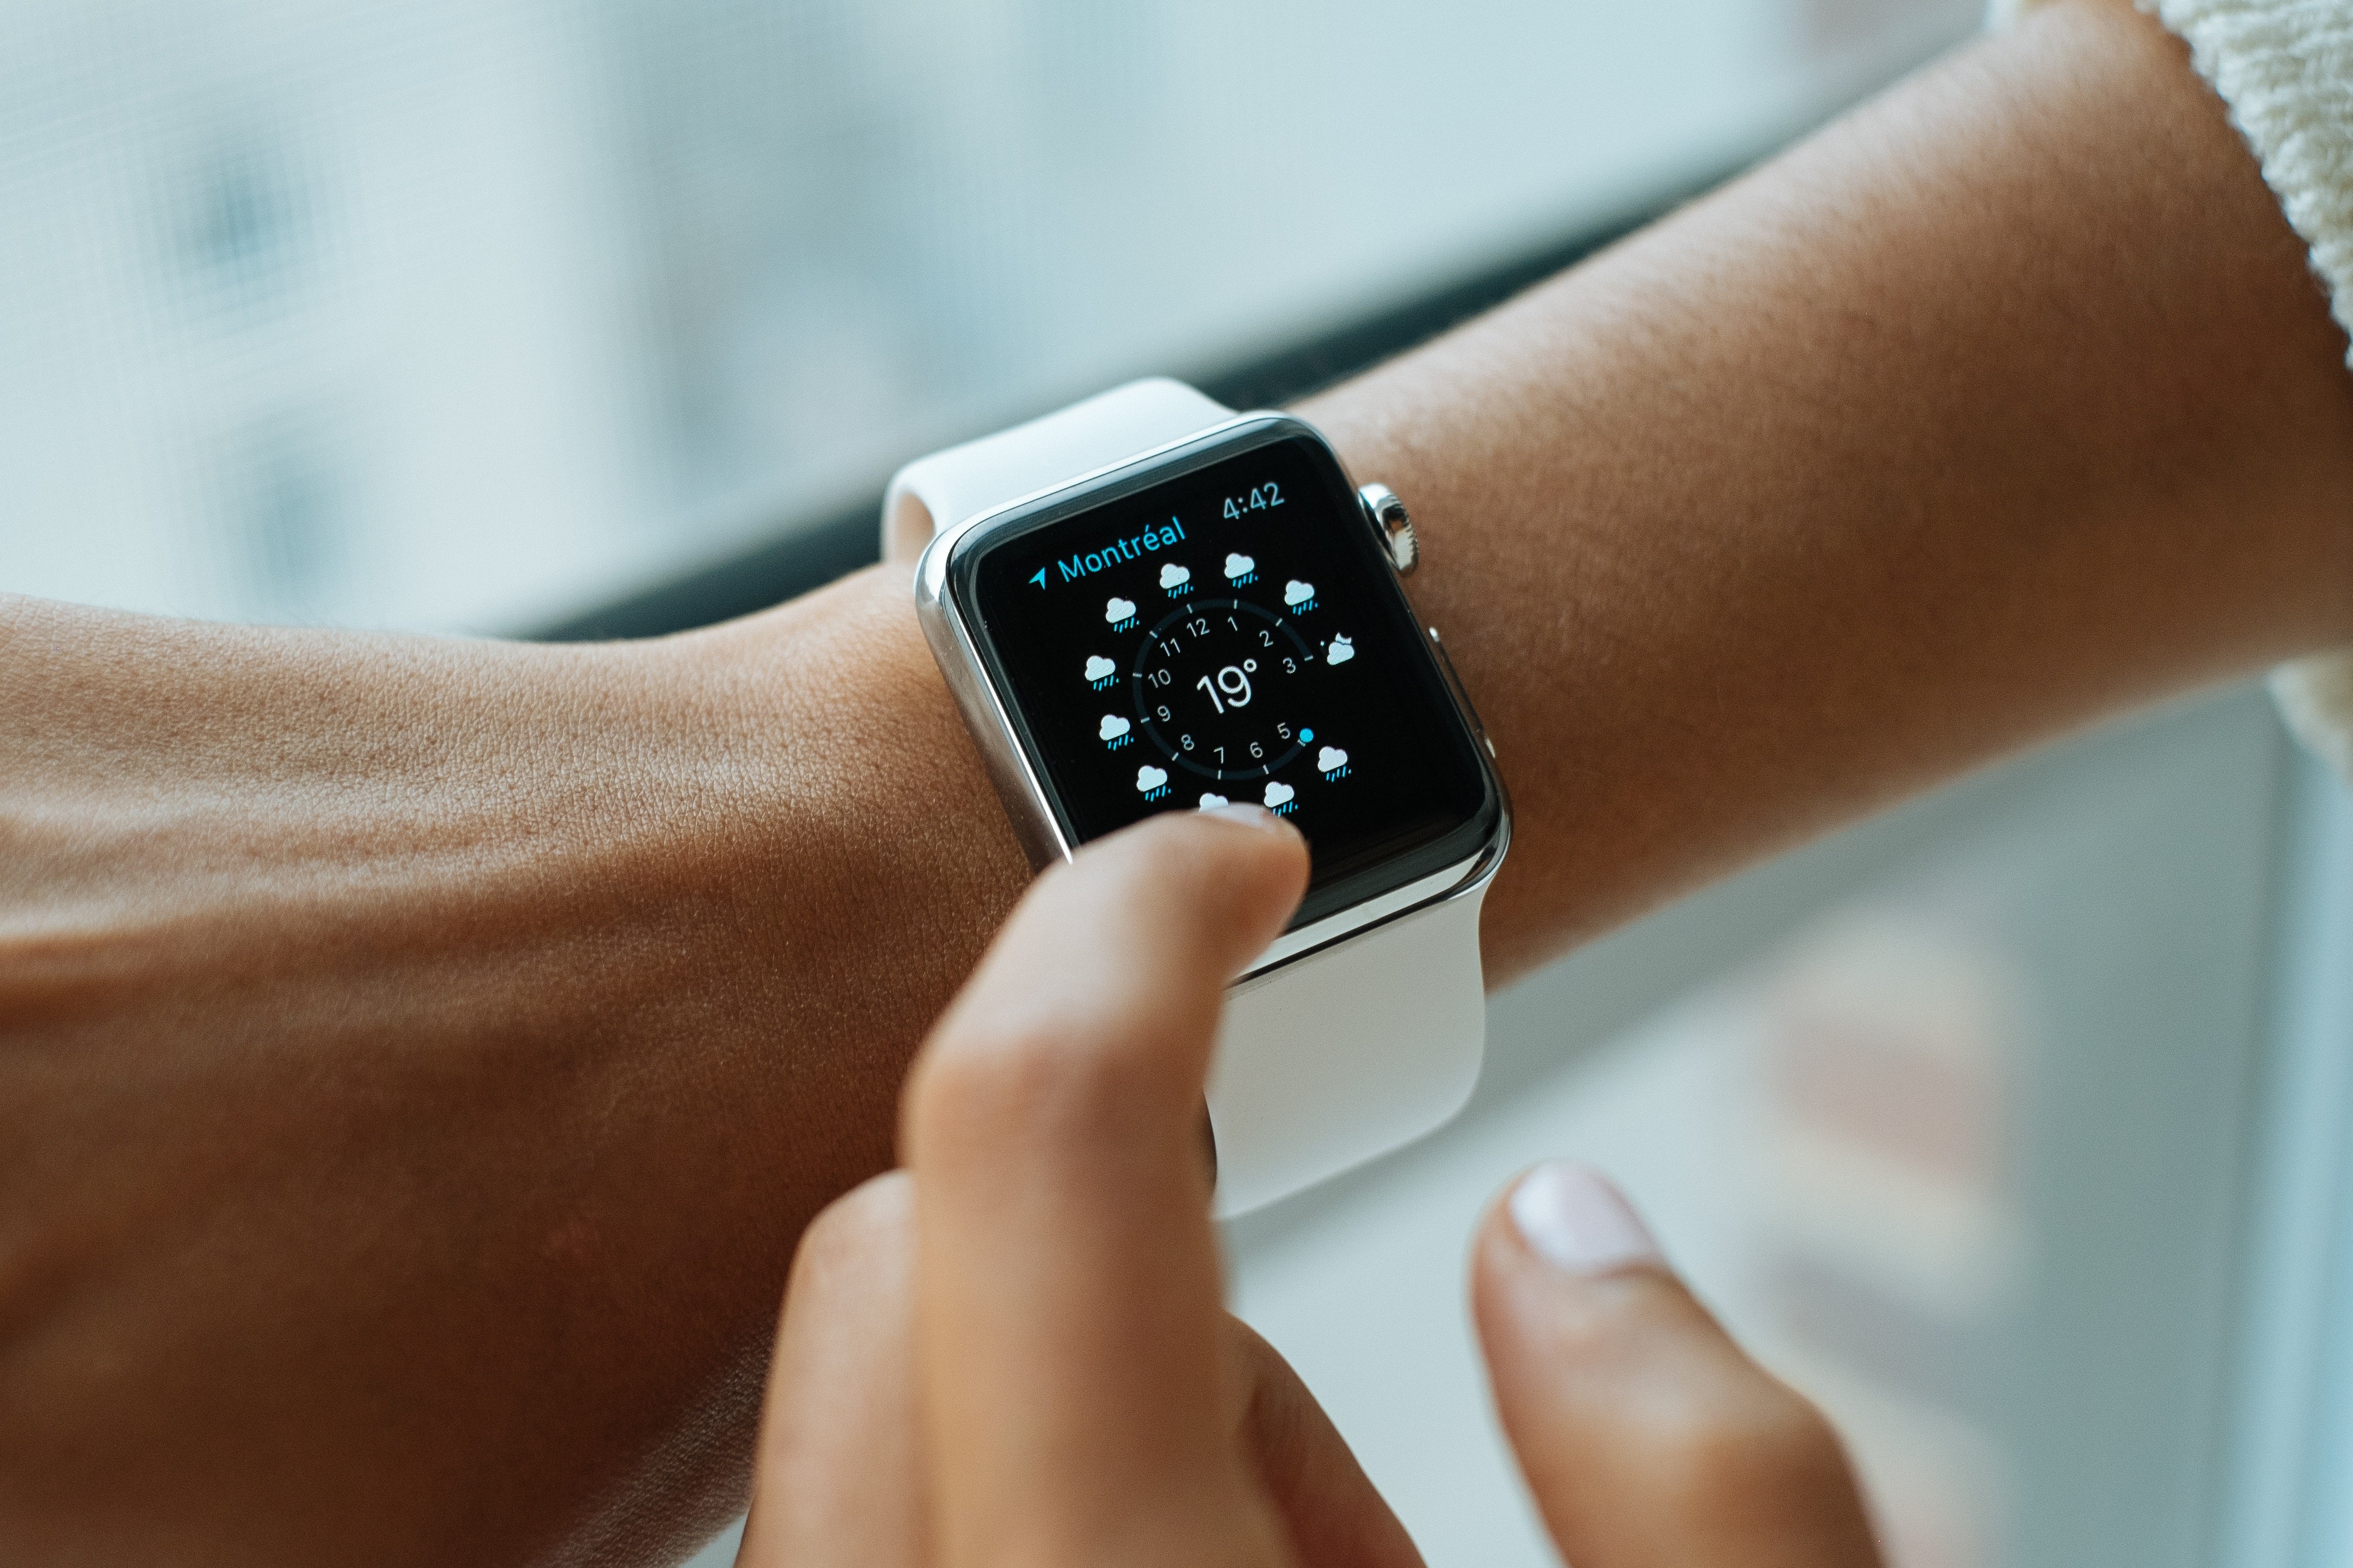 Apple Is Developing Smart Watch With Temperature, Sugar Measuring Functionalities: Bloomberg